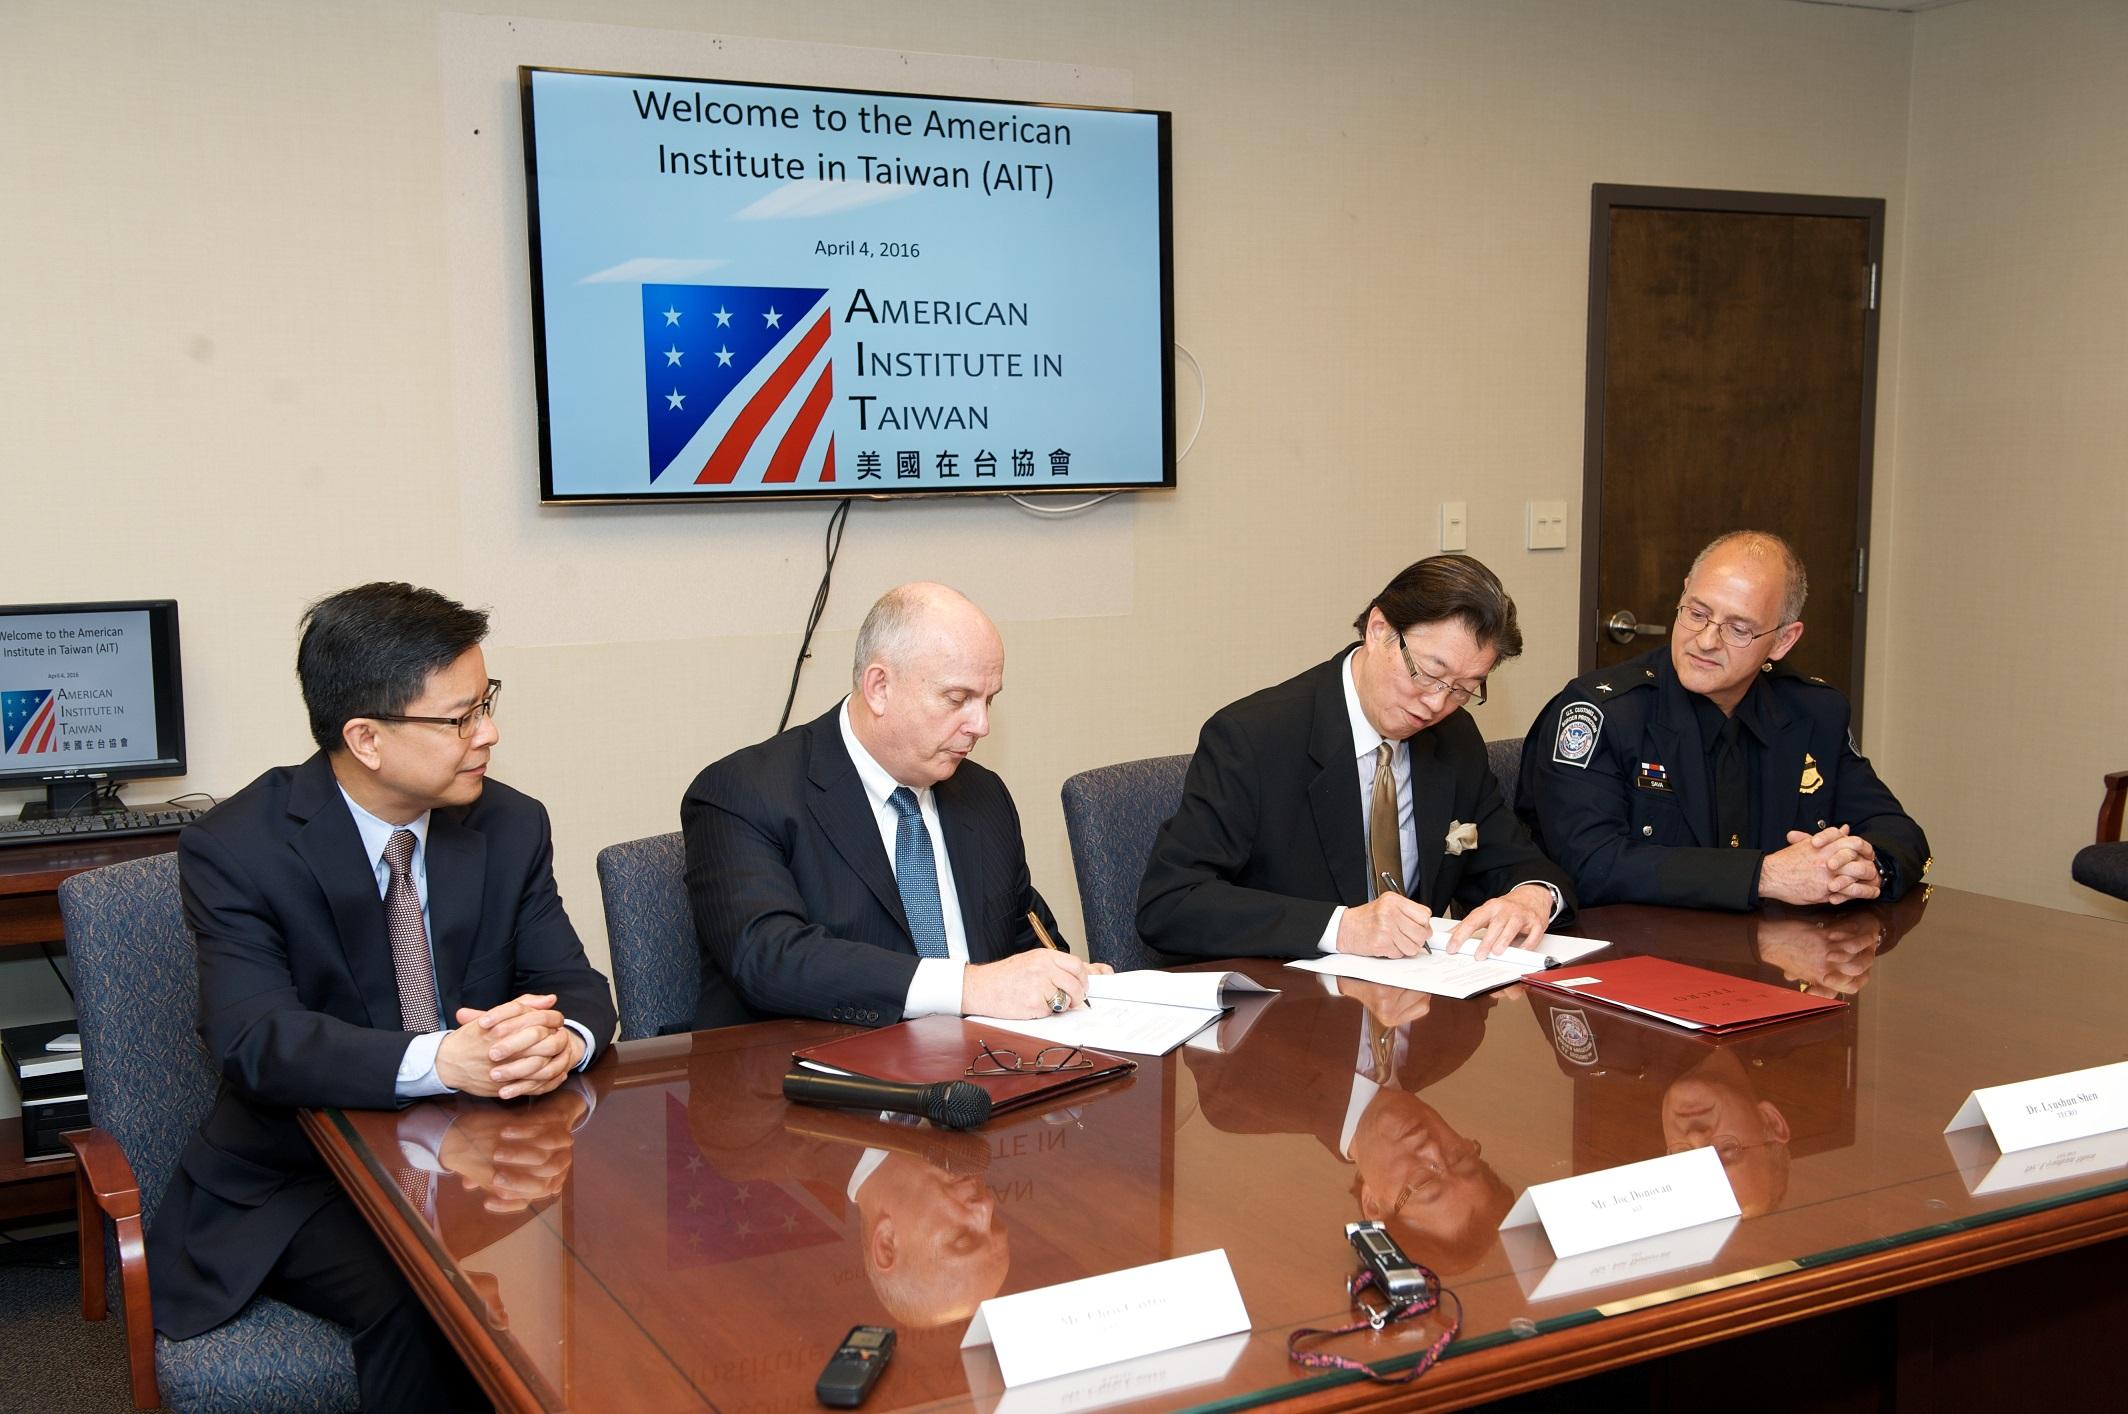 Representative Lyushun Shen of TECRO and Managing Director Joseph R. Donovan Jr. of AIT signed a joint statement regarding cooperation on an International Expedited Traveler Initiative at the AIT Washington headquarters on April 4, 2016, agreeing to work together to mutually grant pre-approved, low-risk travelers from Taiwan and the U.S expedited entry upon arrival. The signing was witnessed by Mr. Chris Castro, first from left, Director of the Taiwan Coordination Office of the U.S. Department of State and Mr. Kenneth Sava, first from right, Director of Passenger Programs of the U.S. Customs and Border Protection.